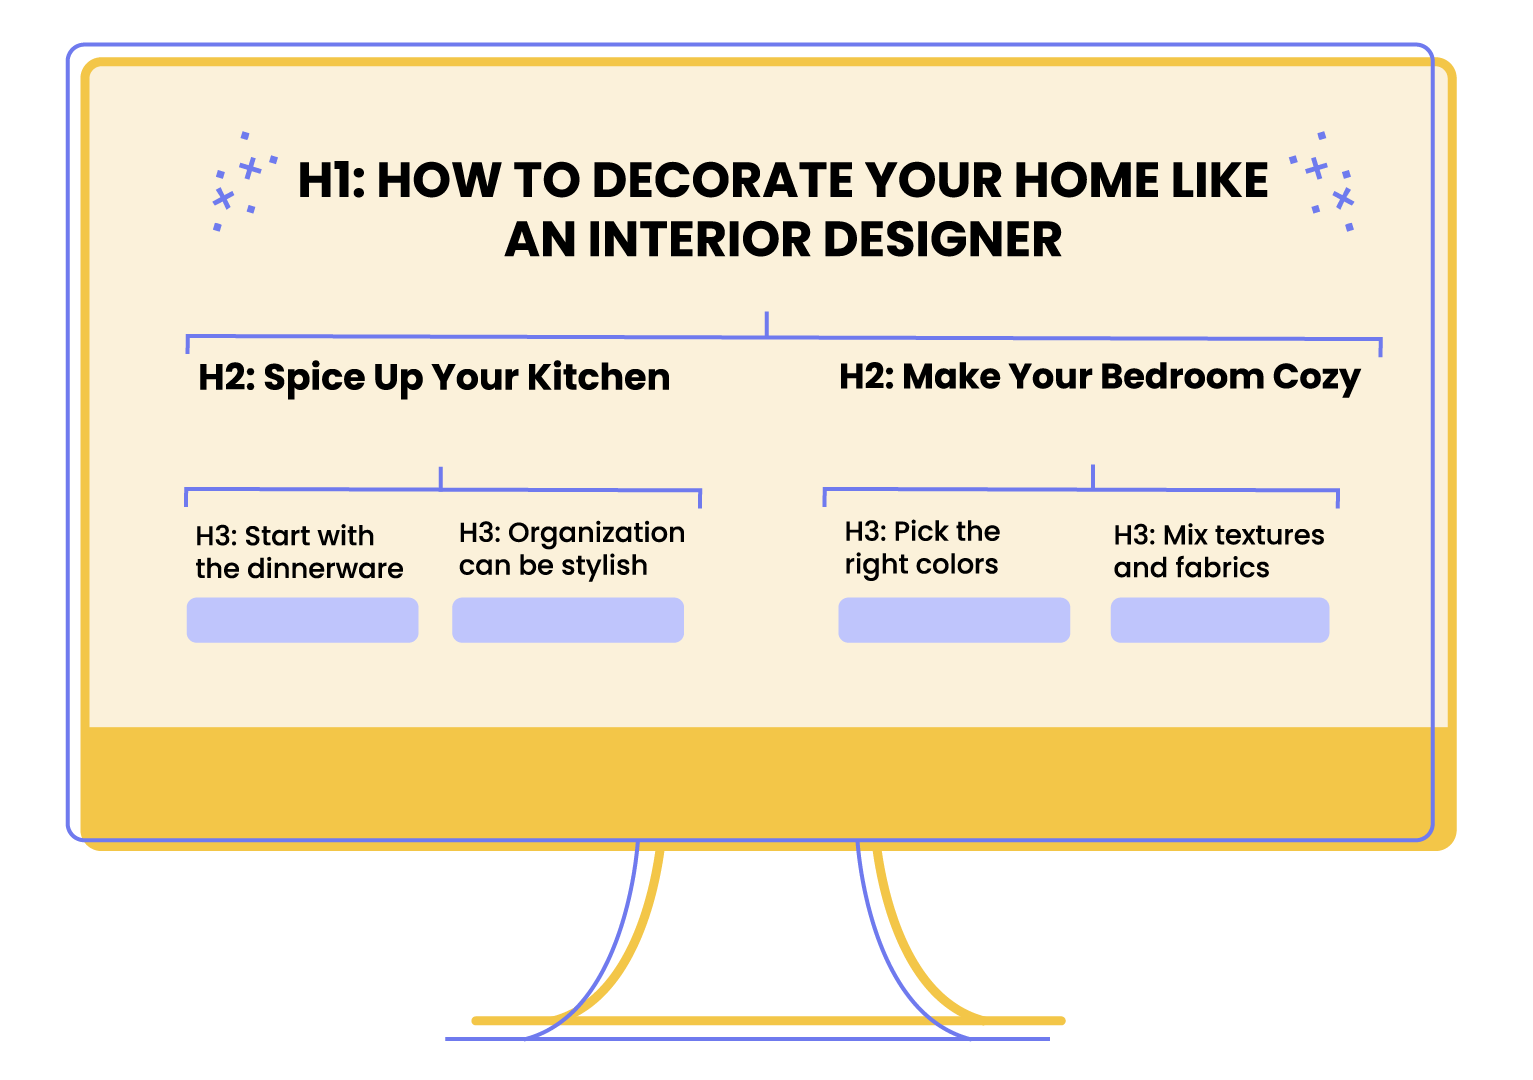 Improve Ecommerce SEO–A graphic illustrating the proper use of title tags for a blog post about home decoration. From top to bottom the titles are, “H1: How to decorate your home like an interior designer”, “H2: Spice up your kitchen”, “H2: Make your bedroom cozy”, “H3: start with the dinnerware”, “H3: Organization can be stylish”, “H3: Pick the right colors”, and “H3: Mix textures and fabrics”.